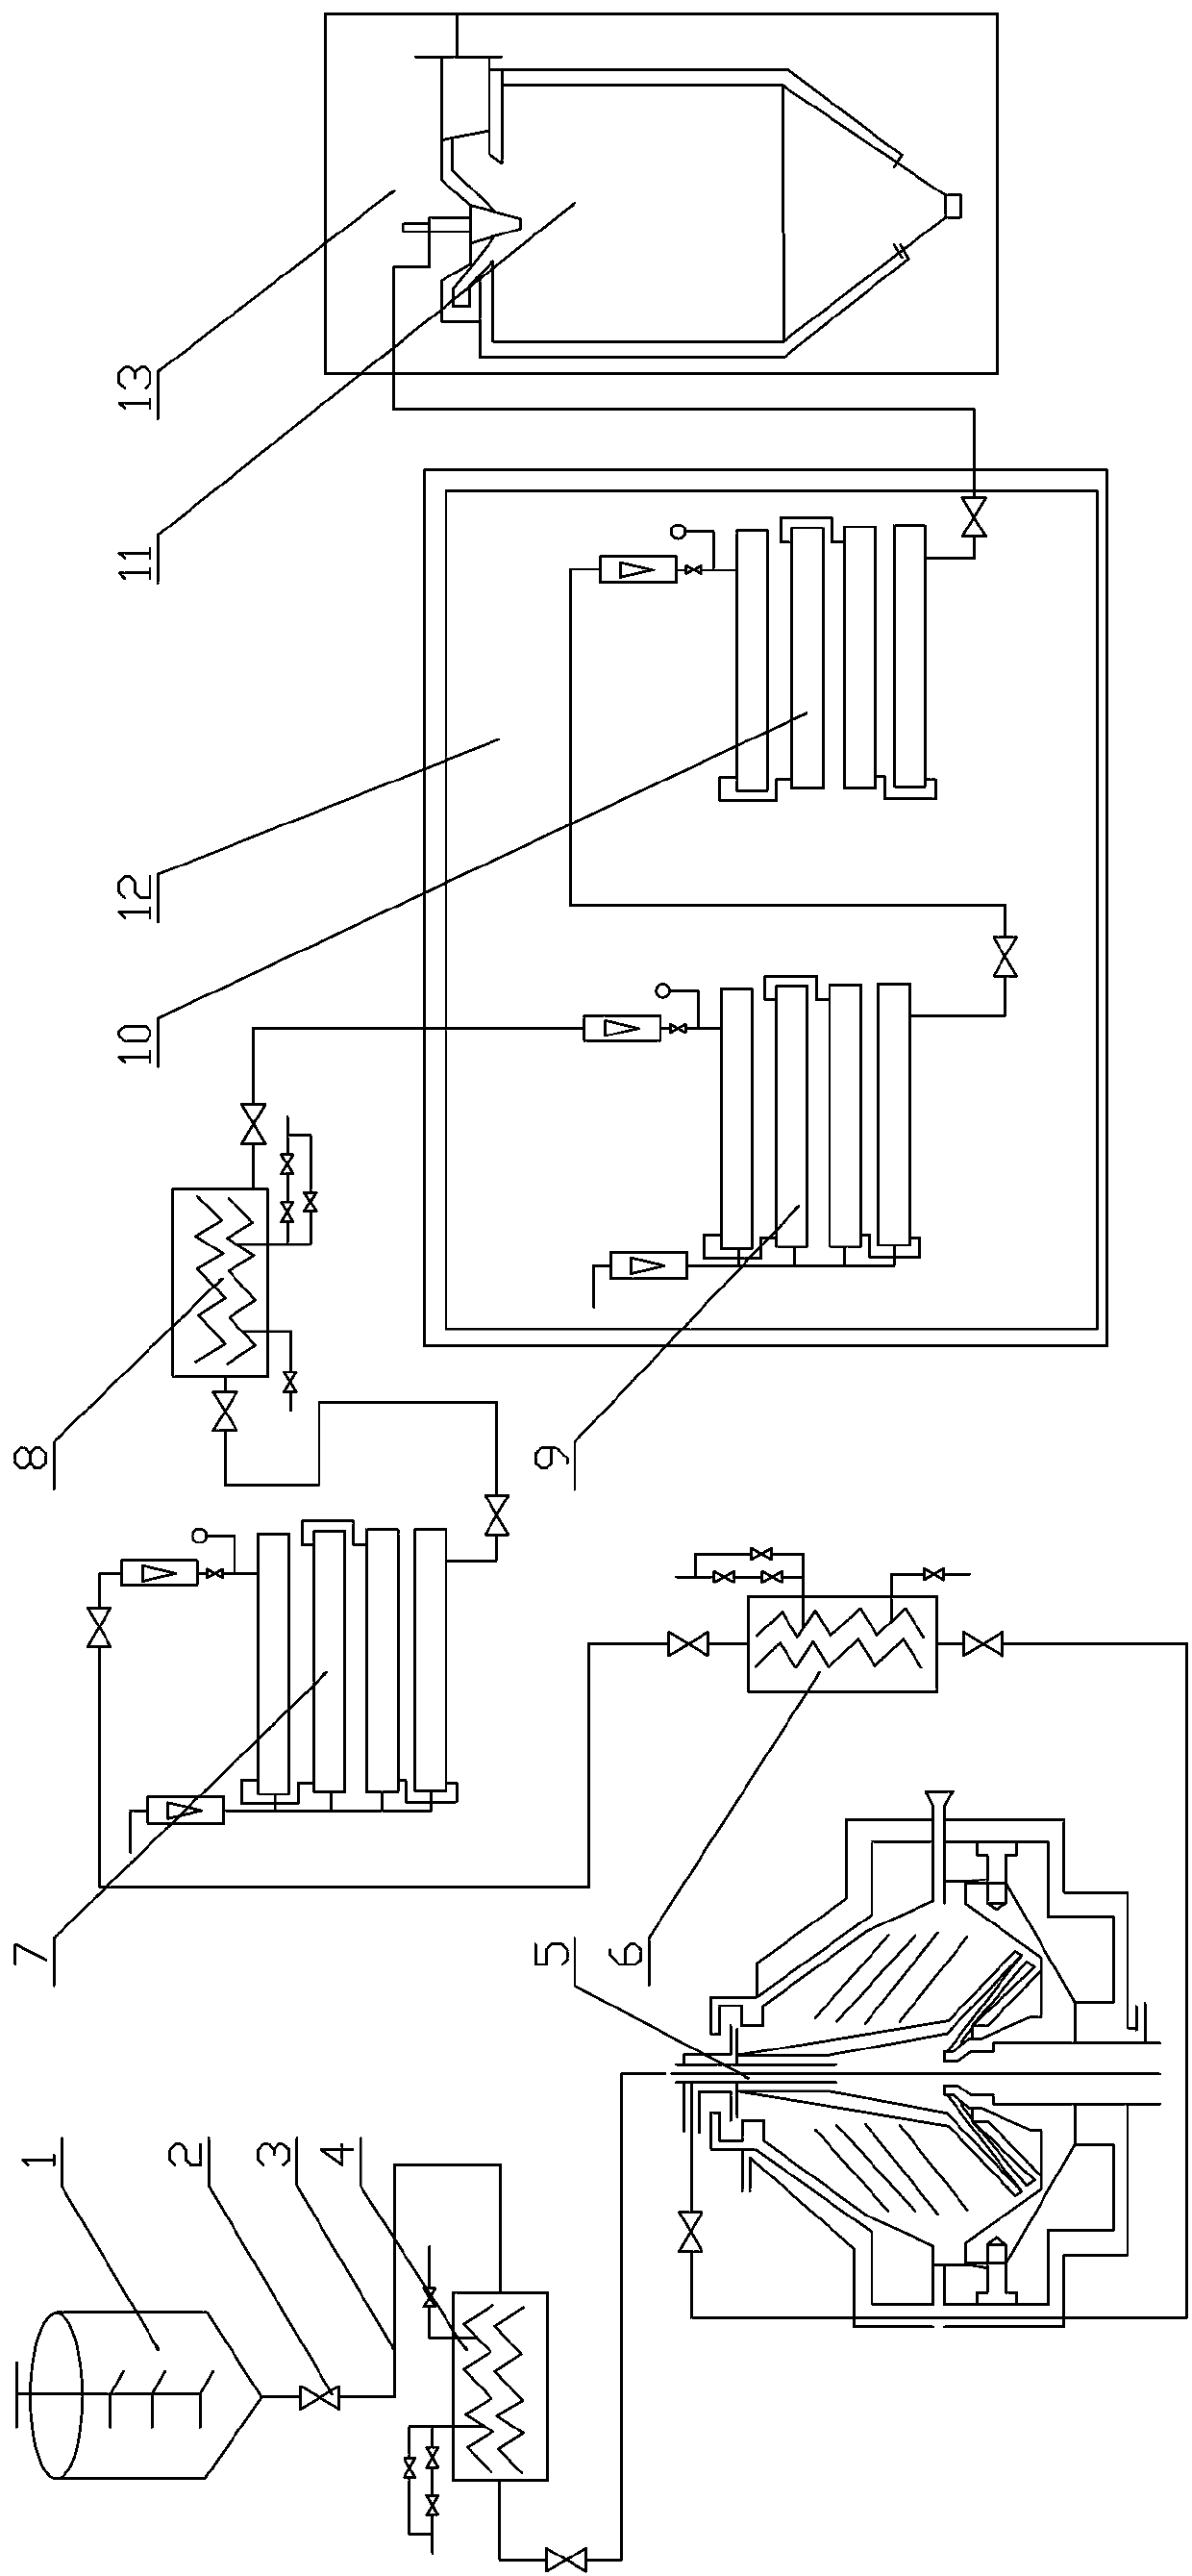 Production system for preparing phycocyanin through low-temperature alcohol extraction as well as process method